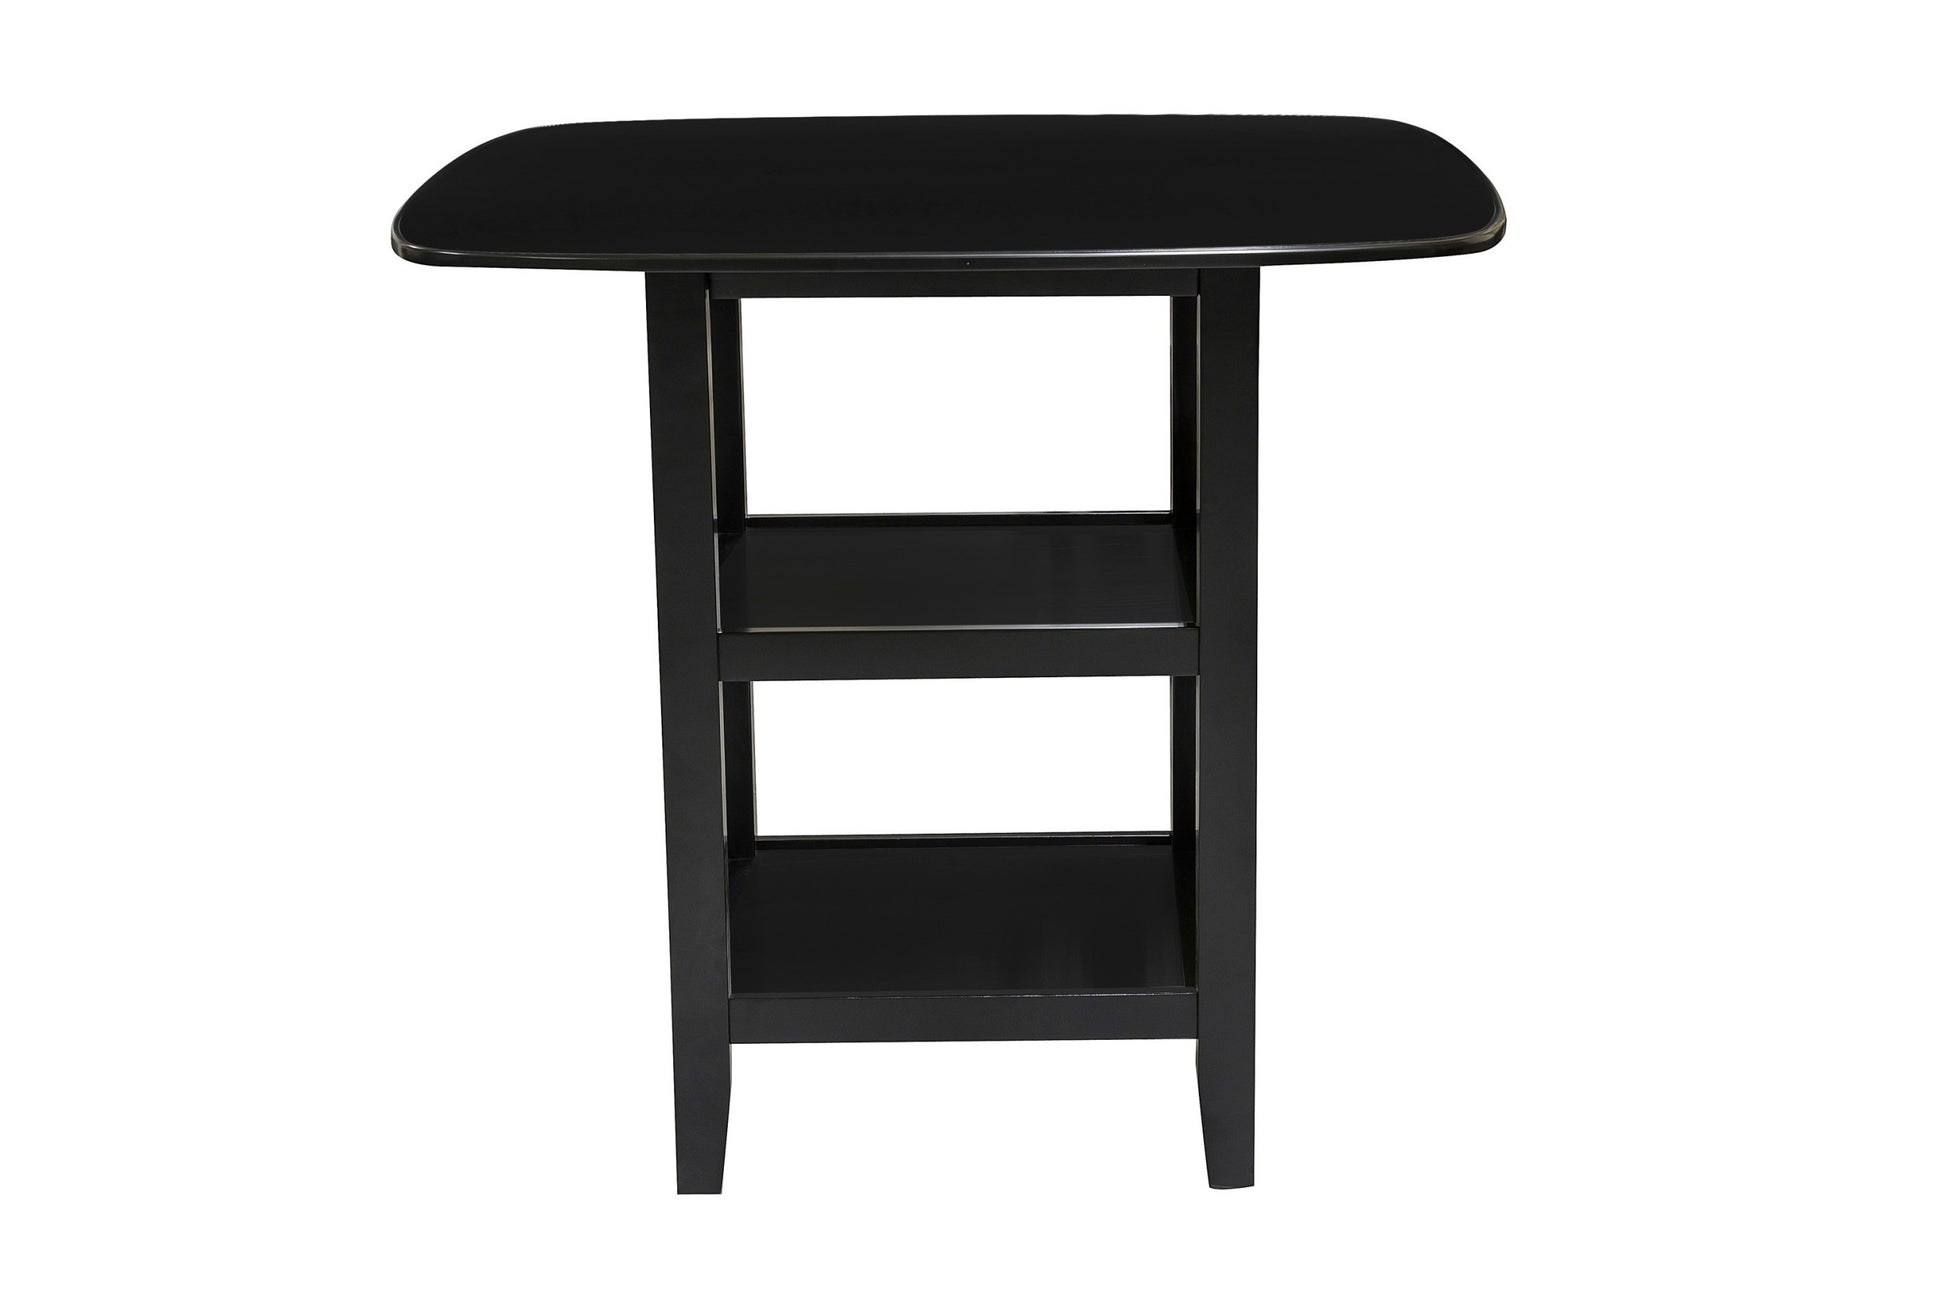 Black Finish 5Pc Counter Height Set Dining